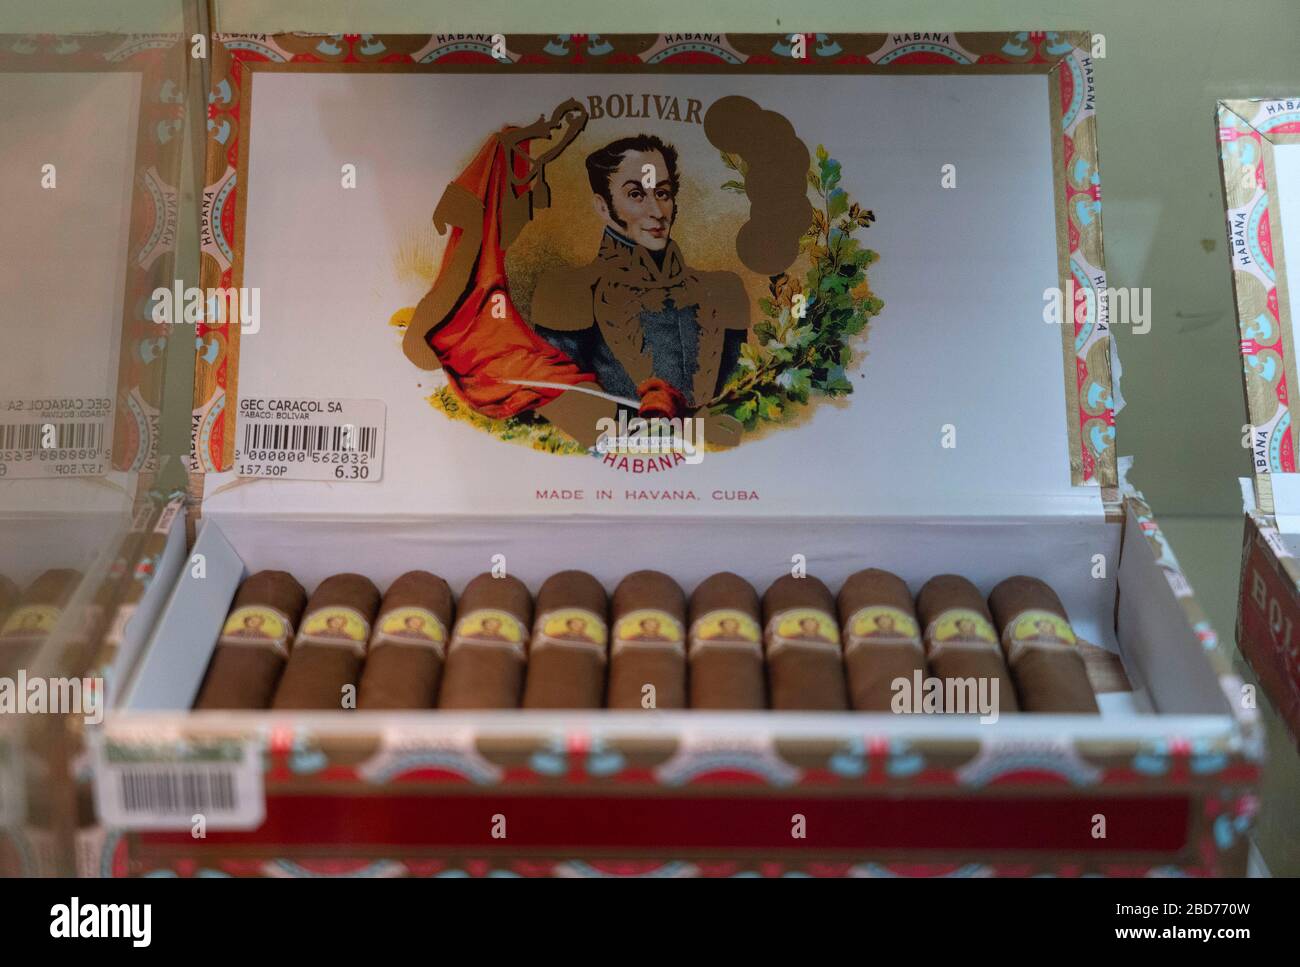 Hotel National de Cuba,Havana: Bolivar cigars which are sold at hotel's cigar shop Stock Photo